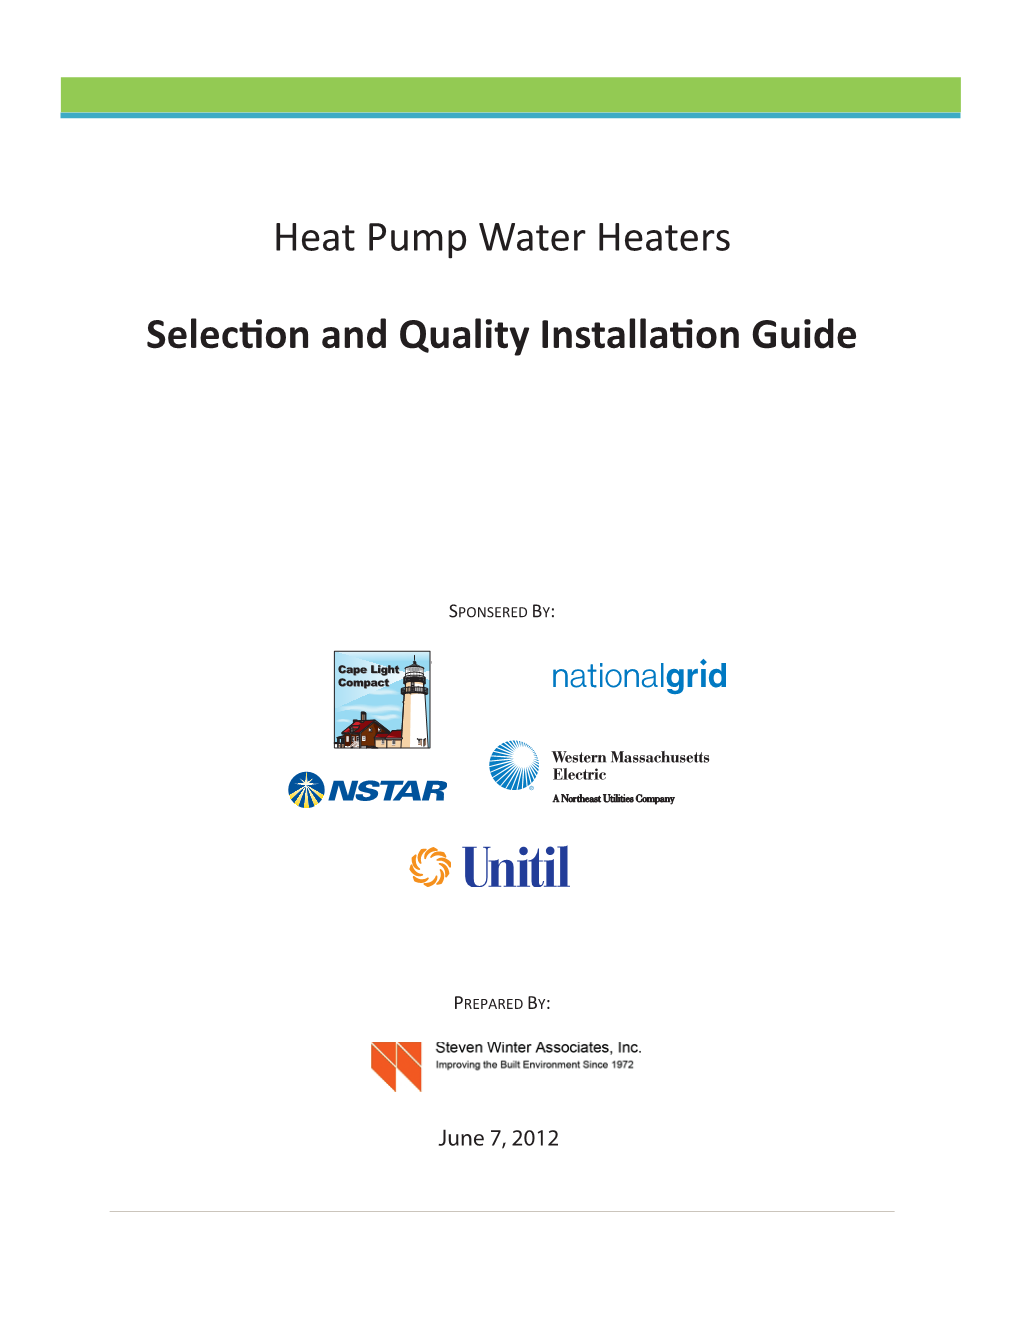 Heat Pump Water Heaters Selection and Quality Installation Guide